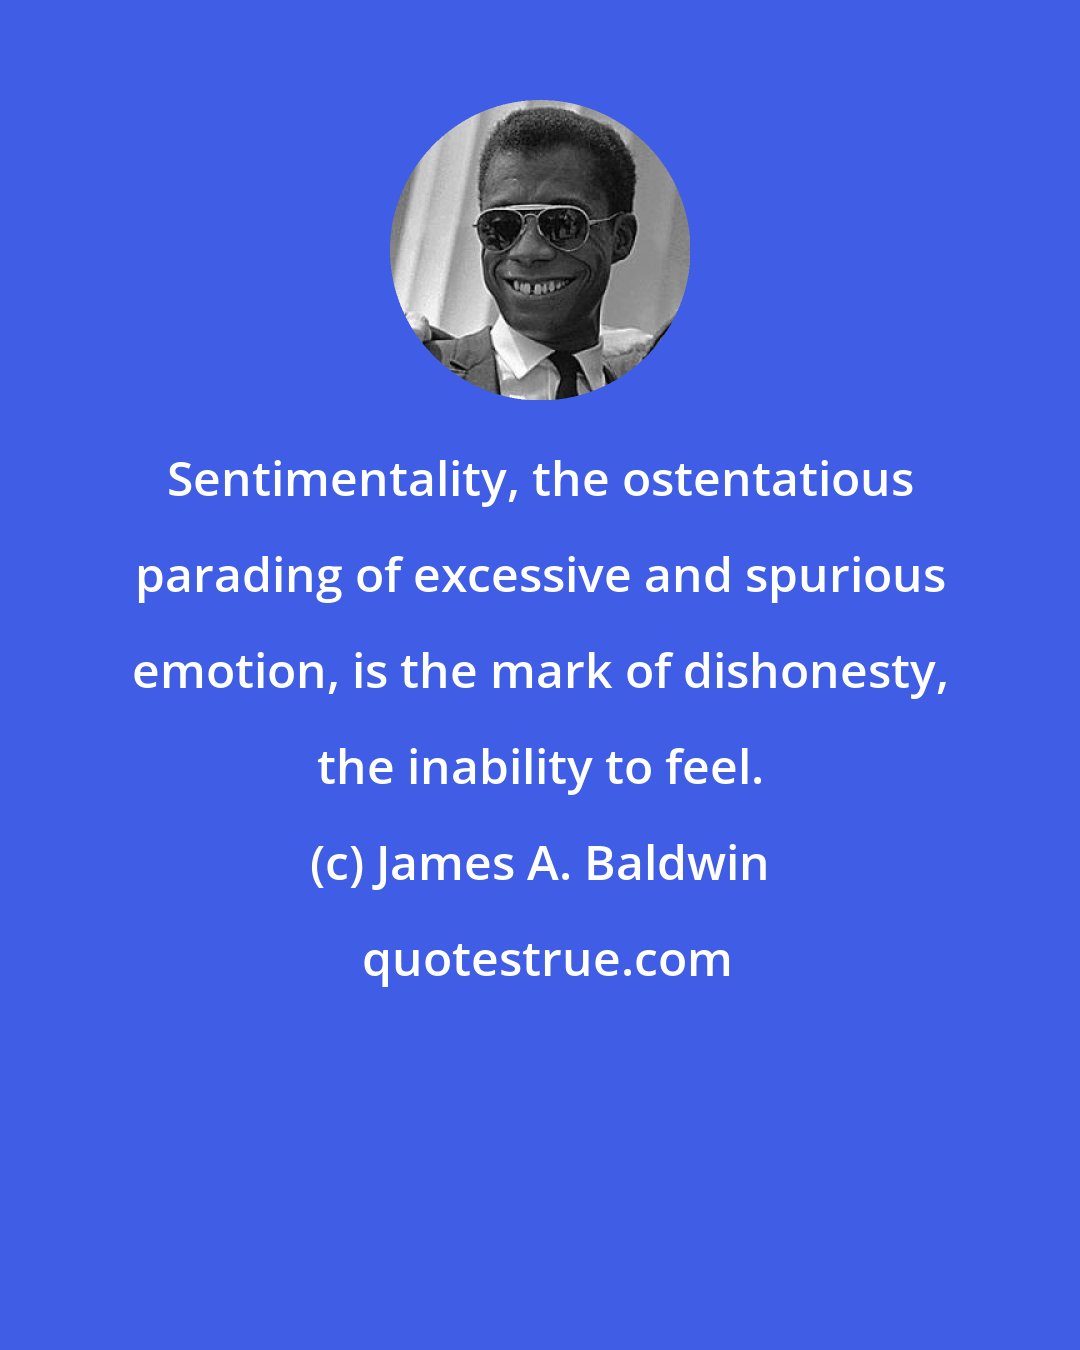 James A. Baldwin: Sentimentality, the ostentatious parading of excessive and spurious emotion, is the mark of dishonesty, the inability to feel.